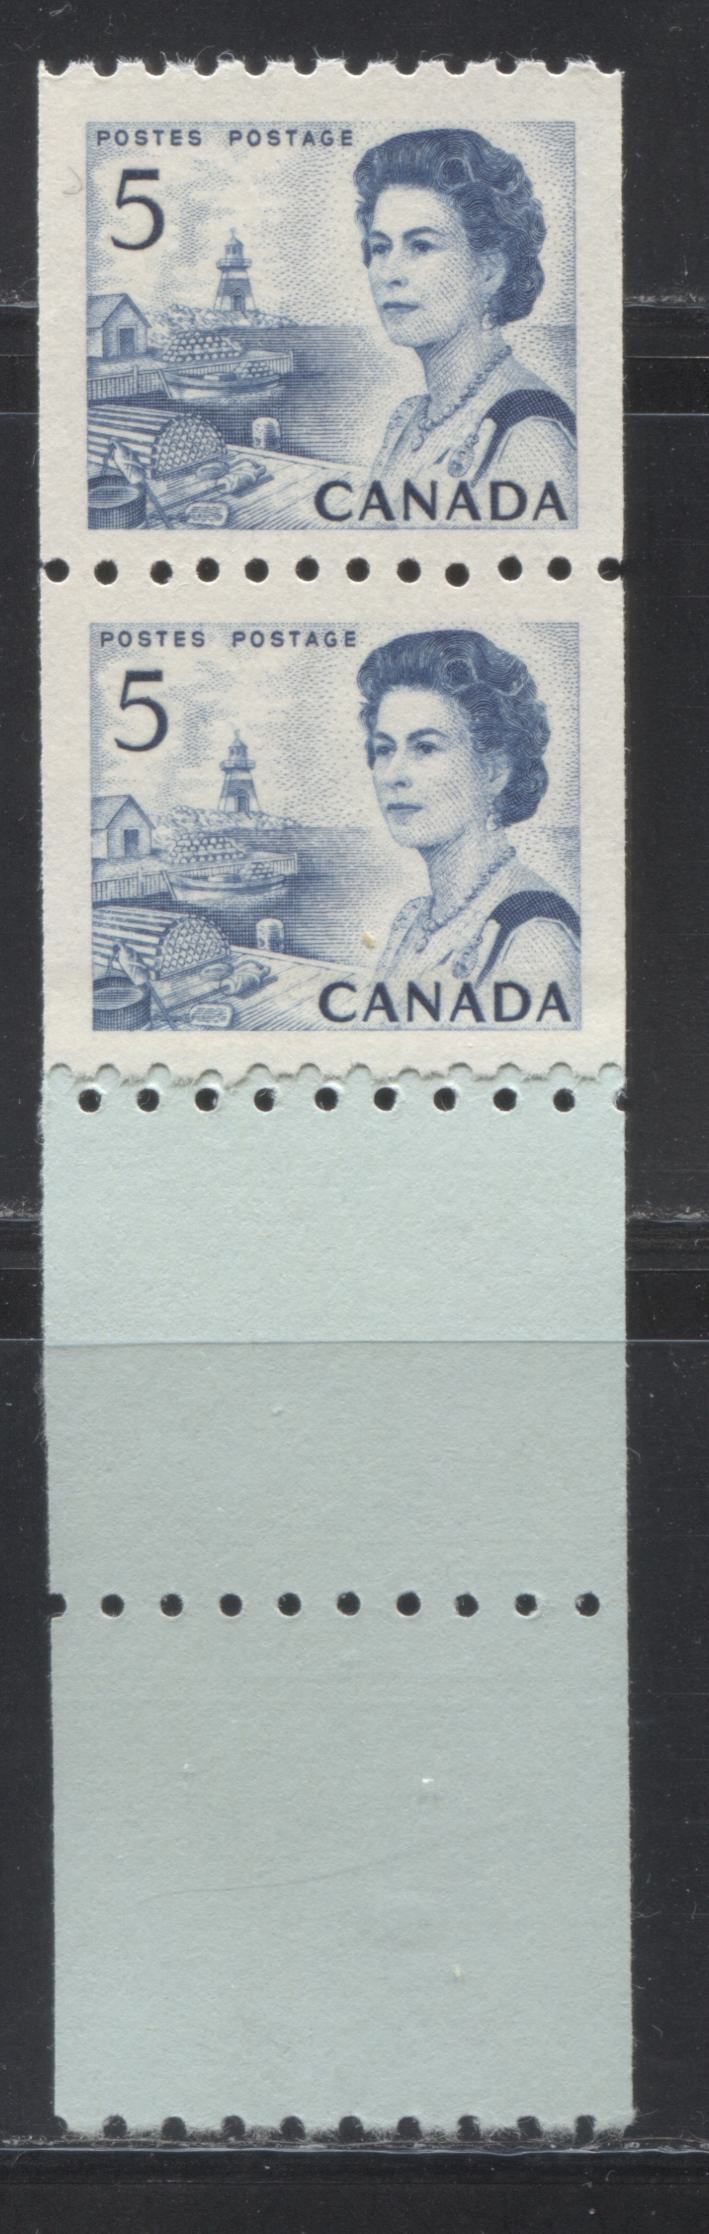 Lot 232 Canada #468 5c Blue Fishing Village, 1967-1973 Centennial Definitive Issue, A VFNH Coil End Strip of 2 Stamps and 2 Tabs, DF Greyish White, Vertical Wove, Streaky Dex